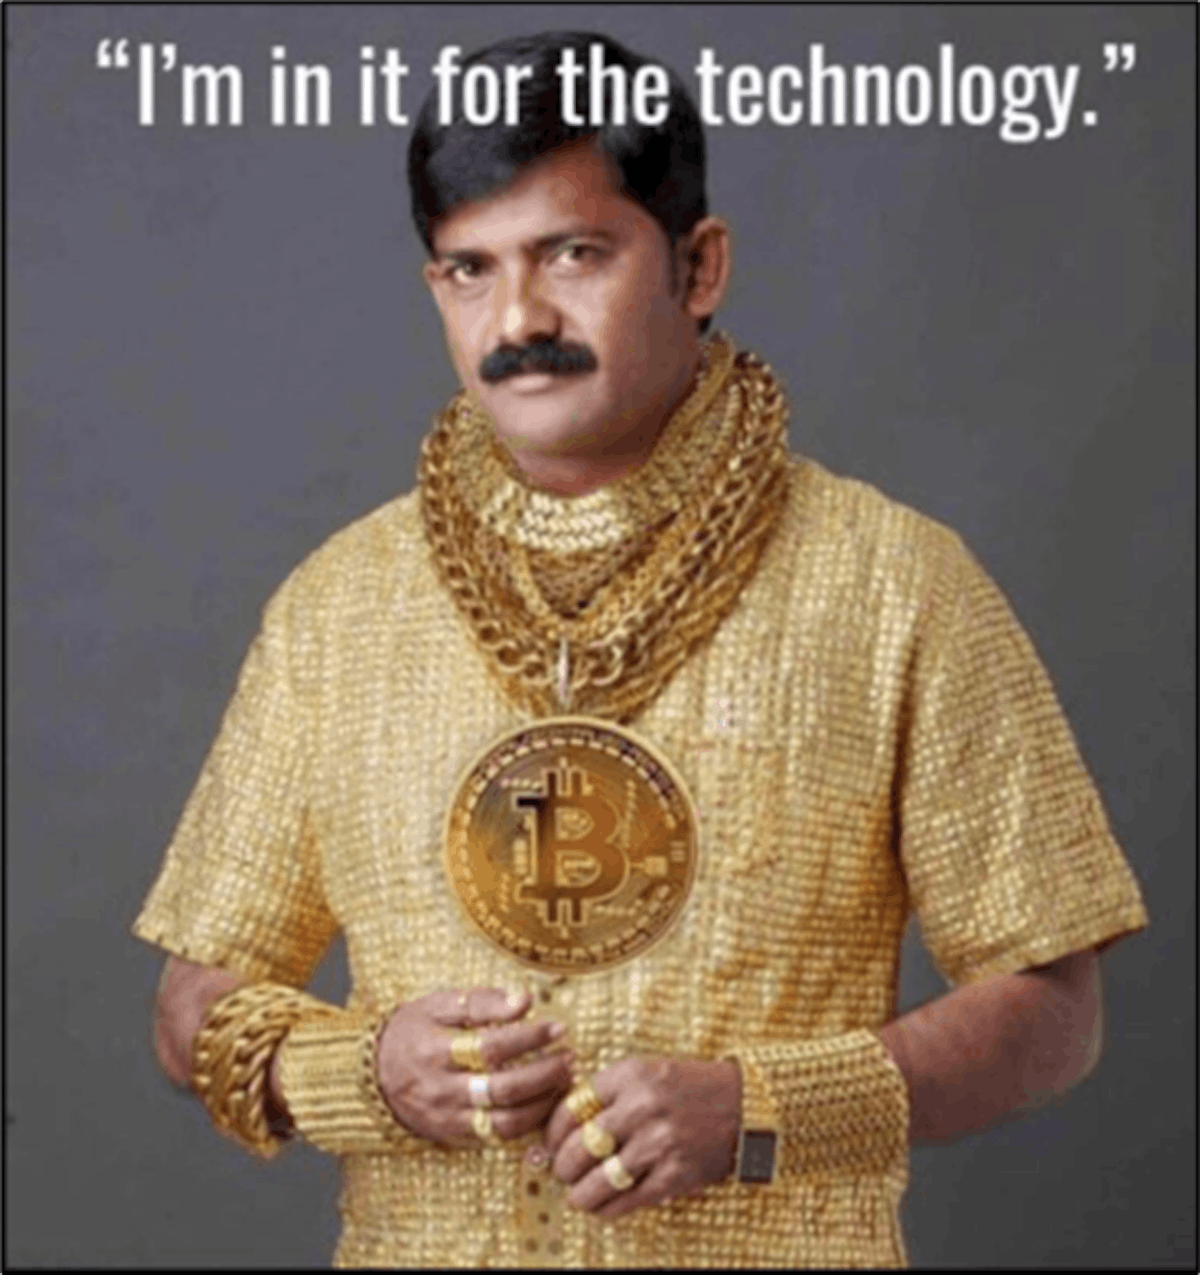 A customary visual for the meme features Indian businessman Datta Phuge (RIP) who had a penchant for gold.